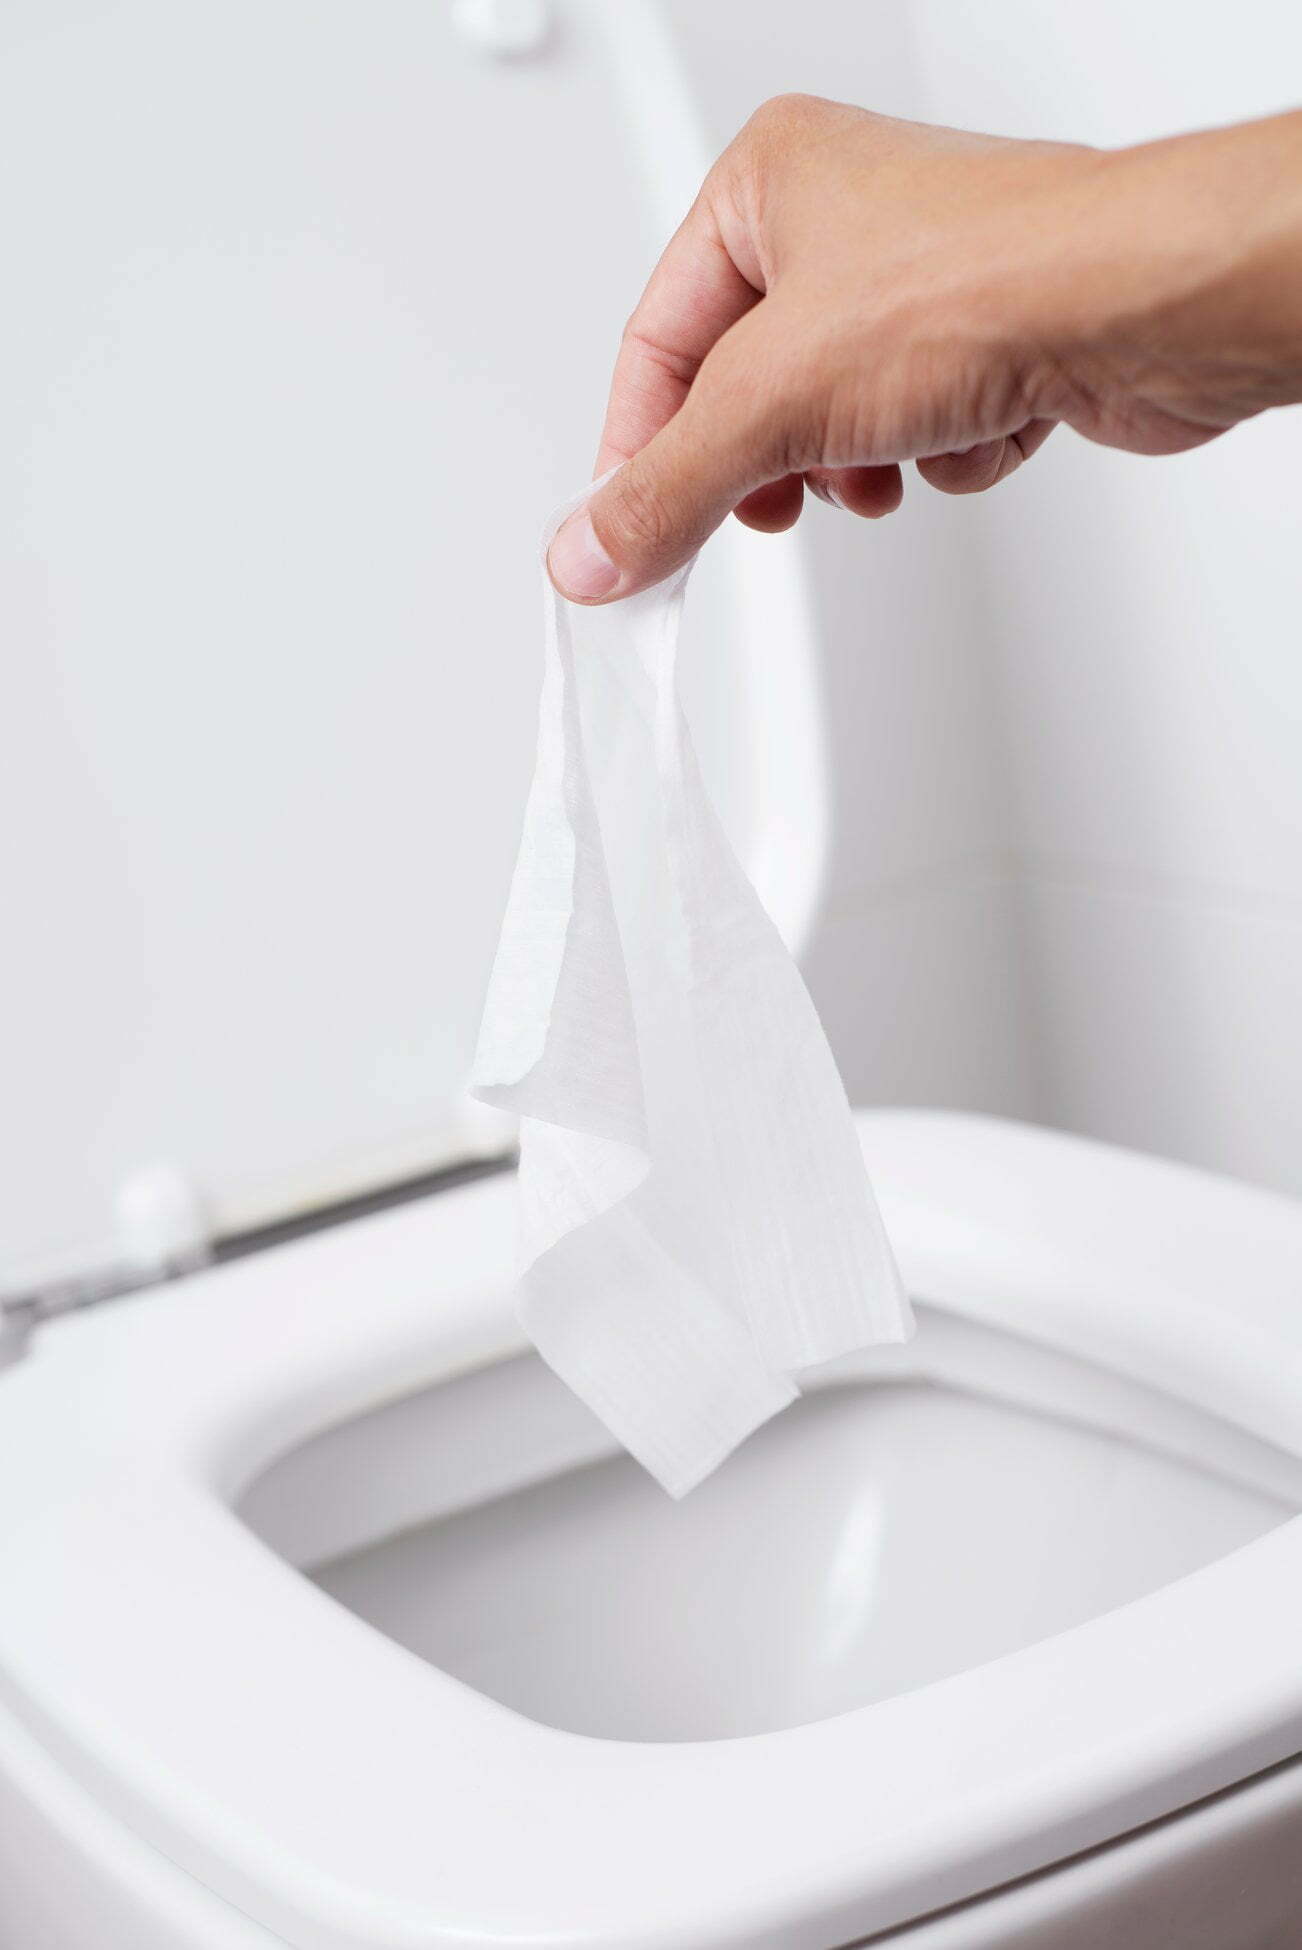 Read more about the article FLUSHABLE WIPES